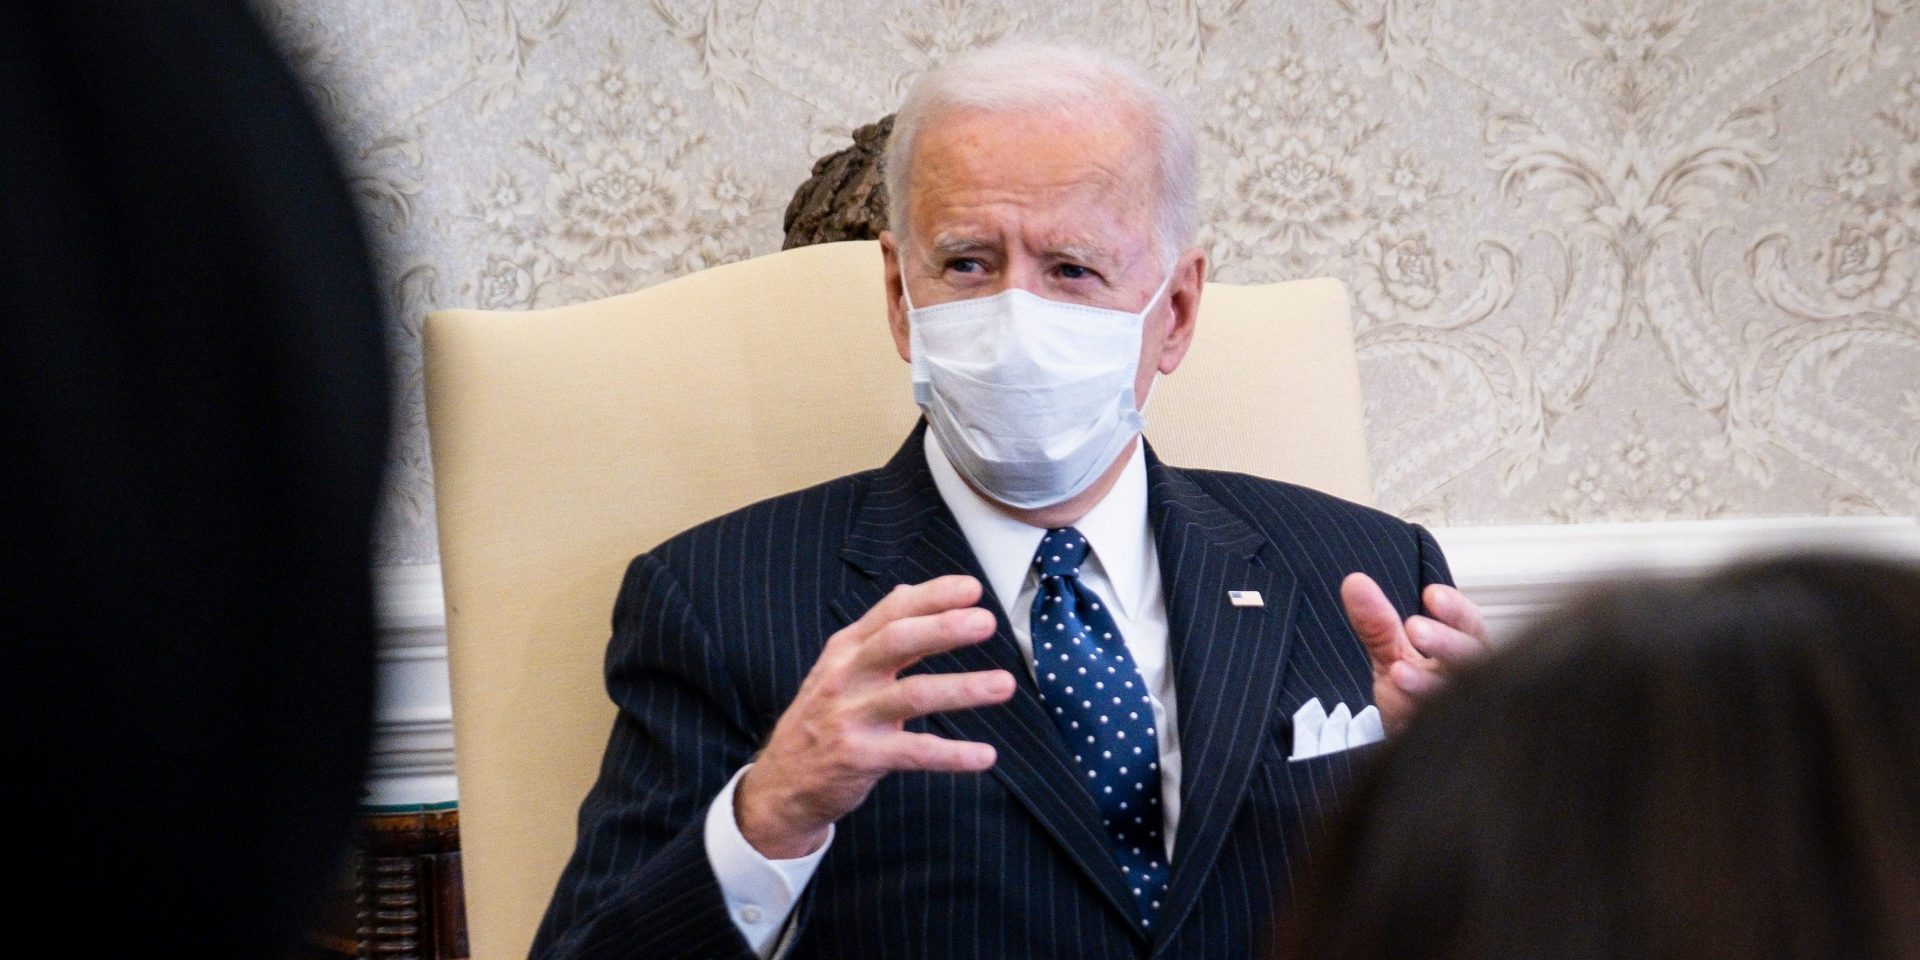 After Biden misplaced the Iowa caucuses in 2020, staffers steered that he refinance his home, fresh e book says